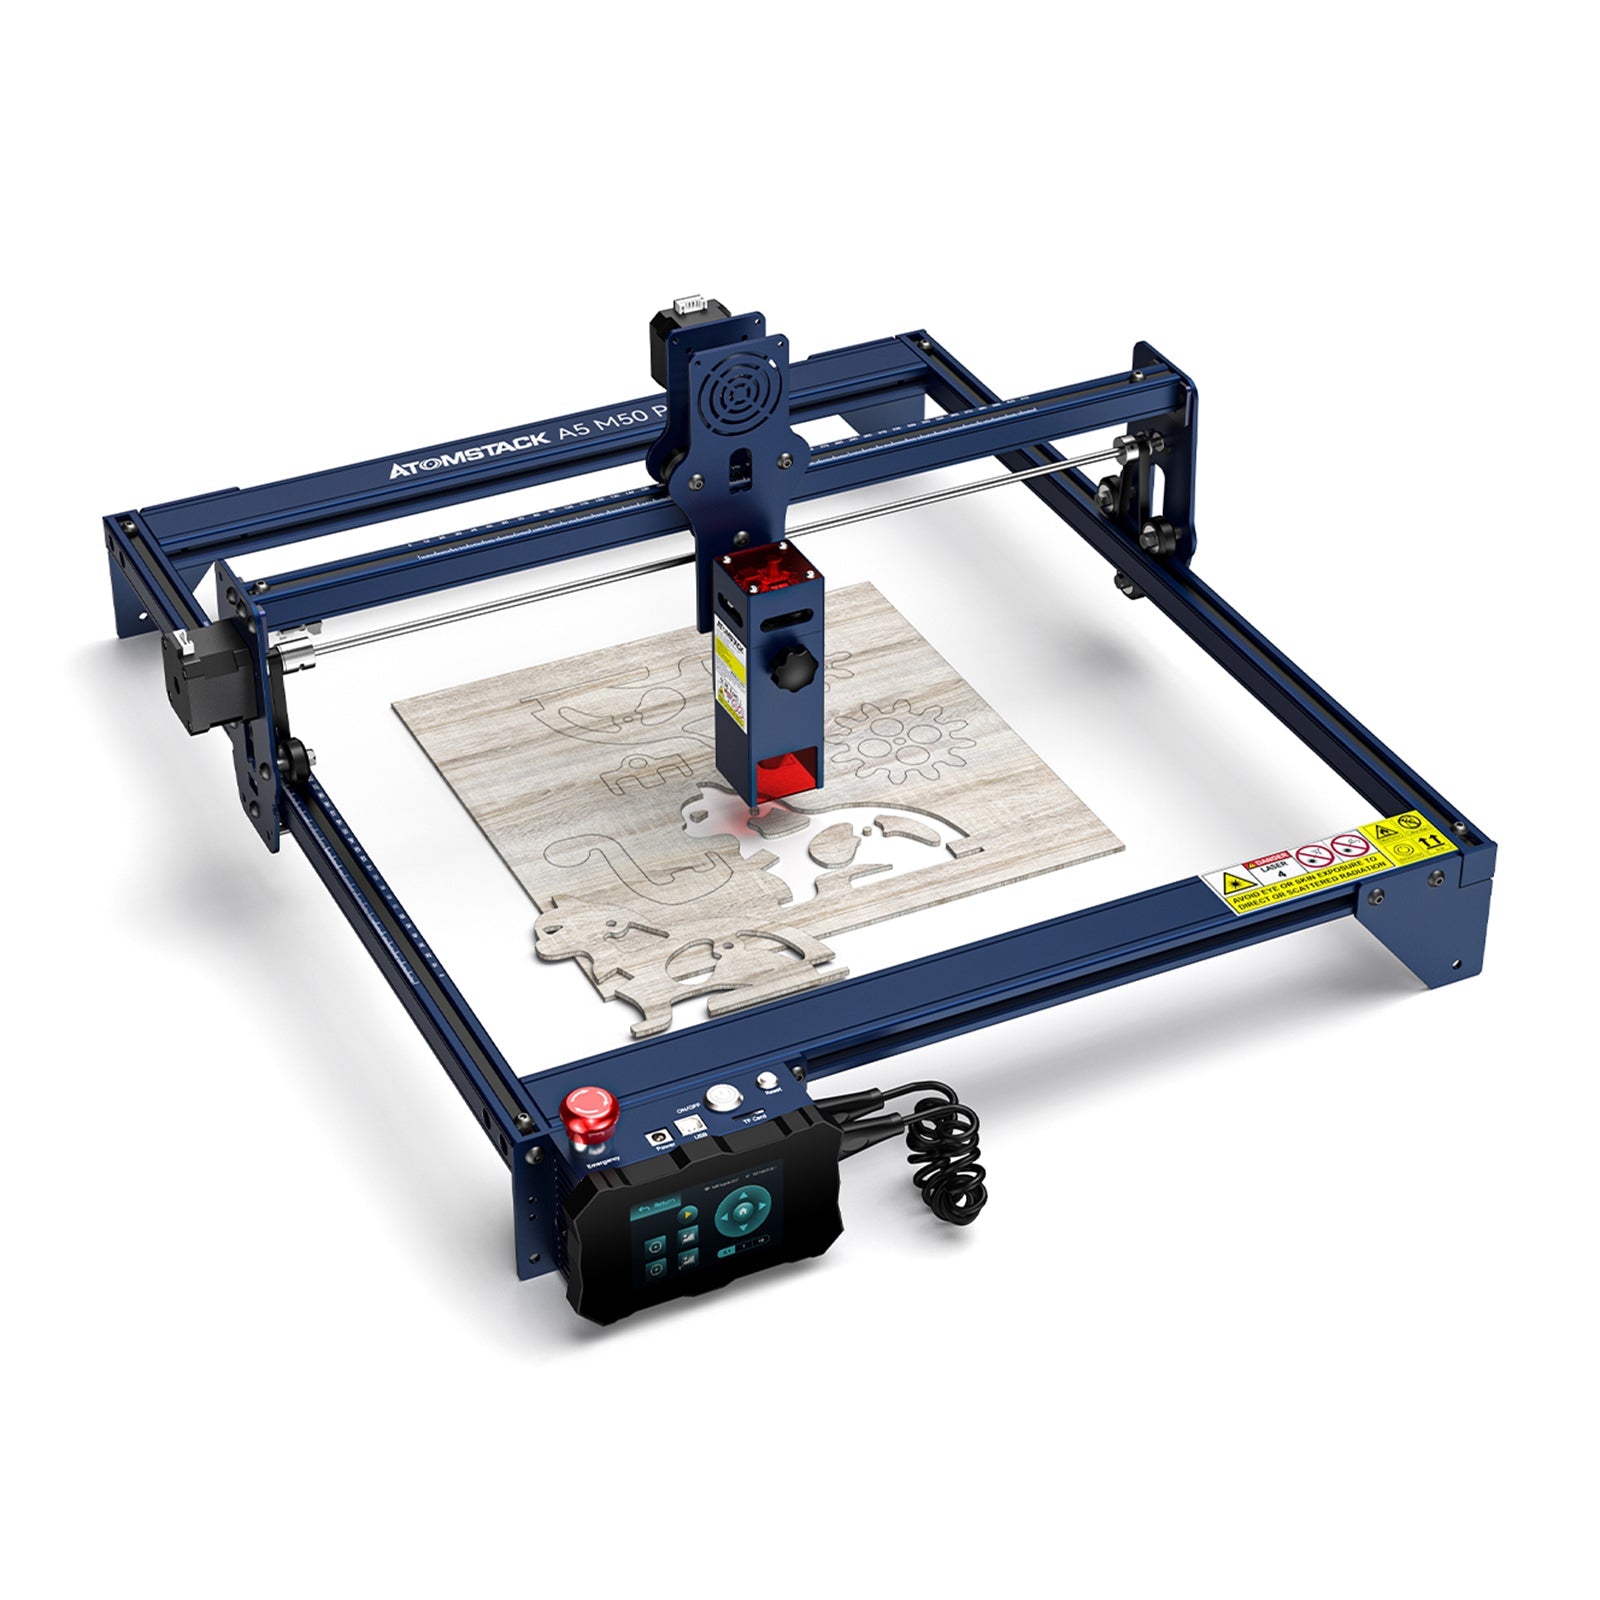 ATOMSTACK A5 M50 PRO best Laser Engraver and cutter